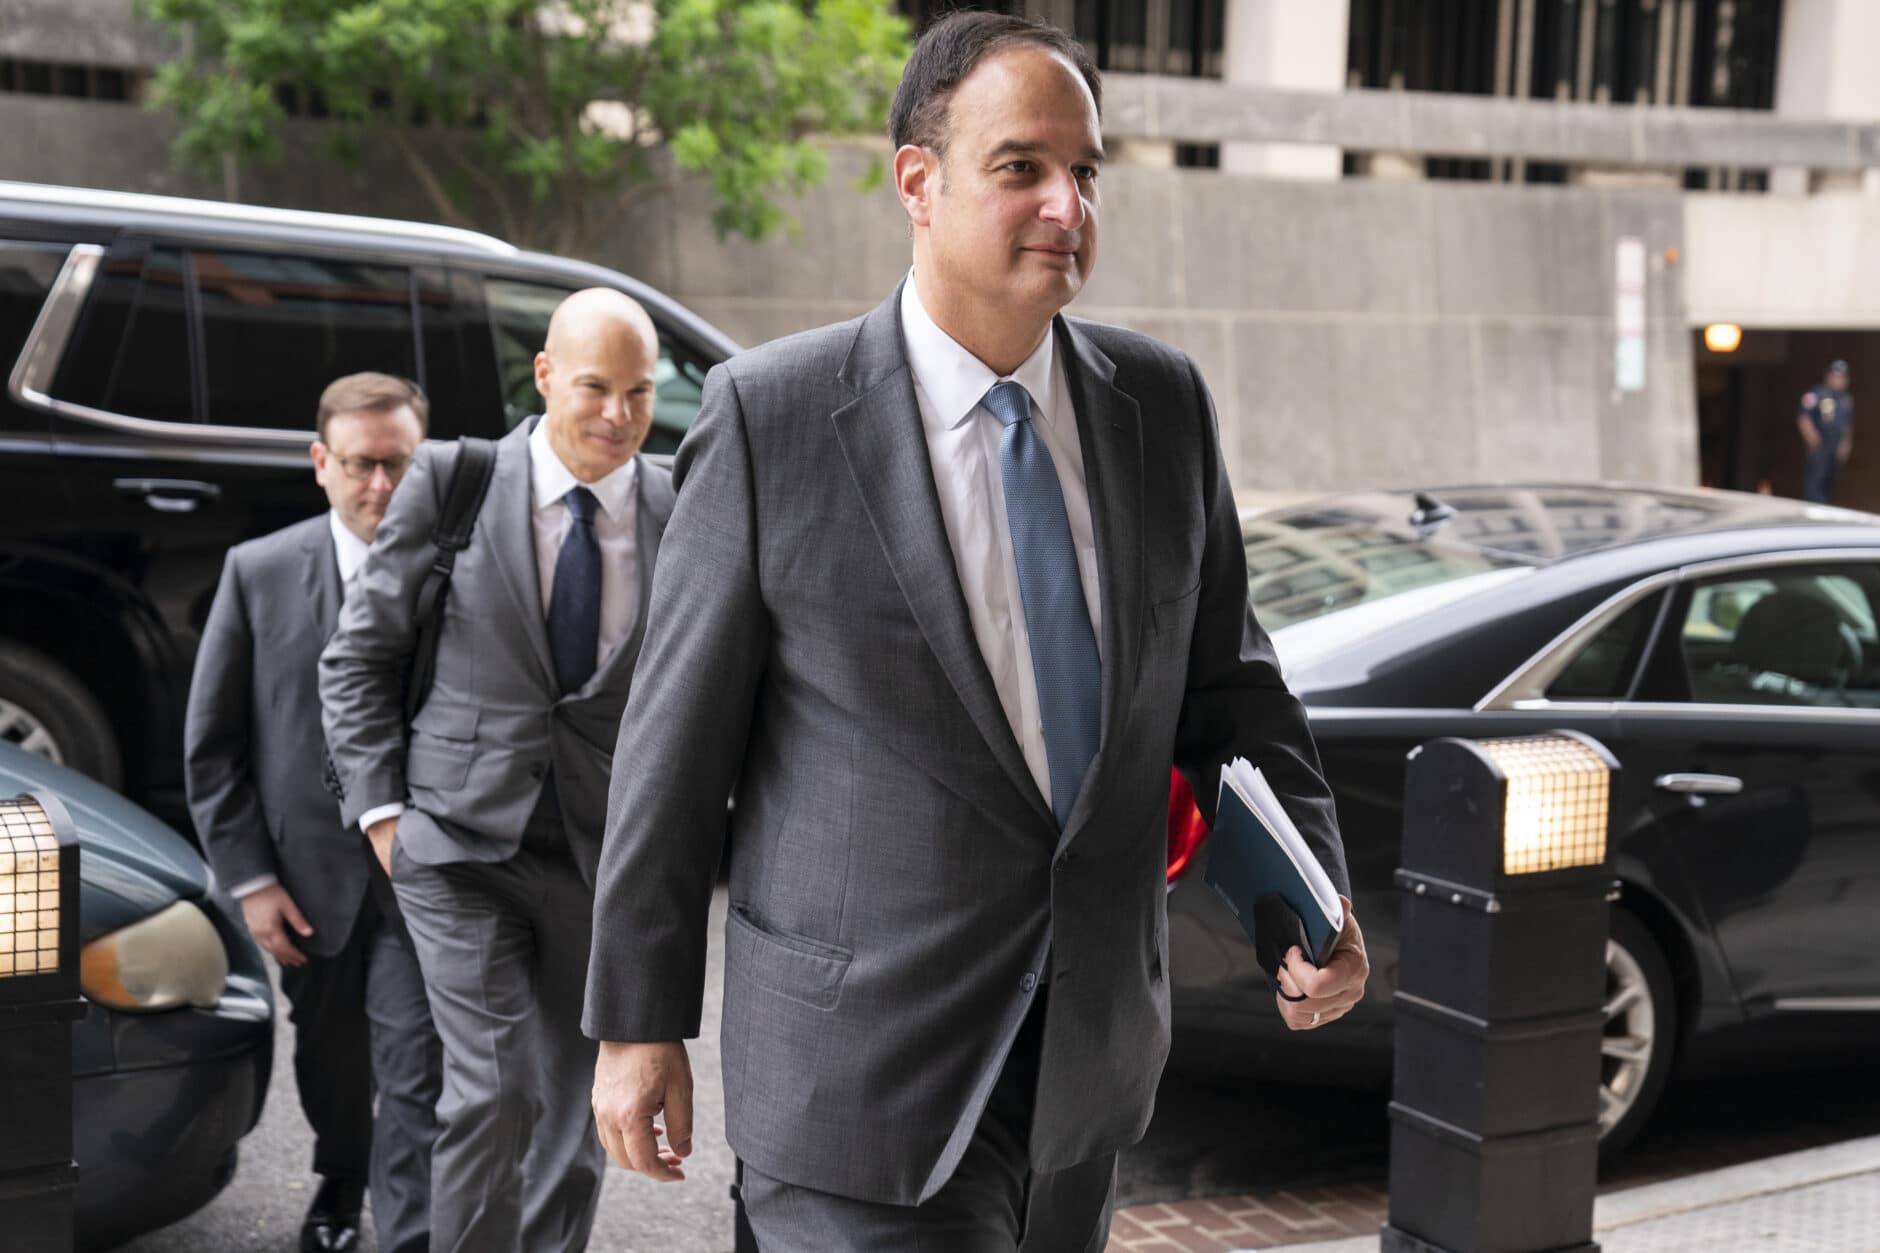 Feds tell jury Democrat-backed lawyer Michael Sussmann used FBI as 'a political pawn' | Courthouse News Service